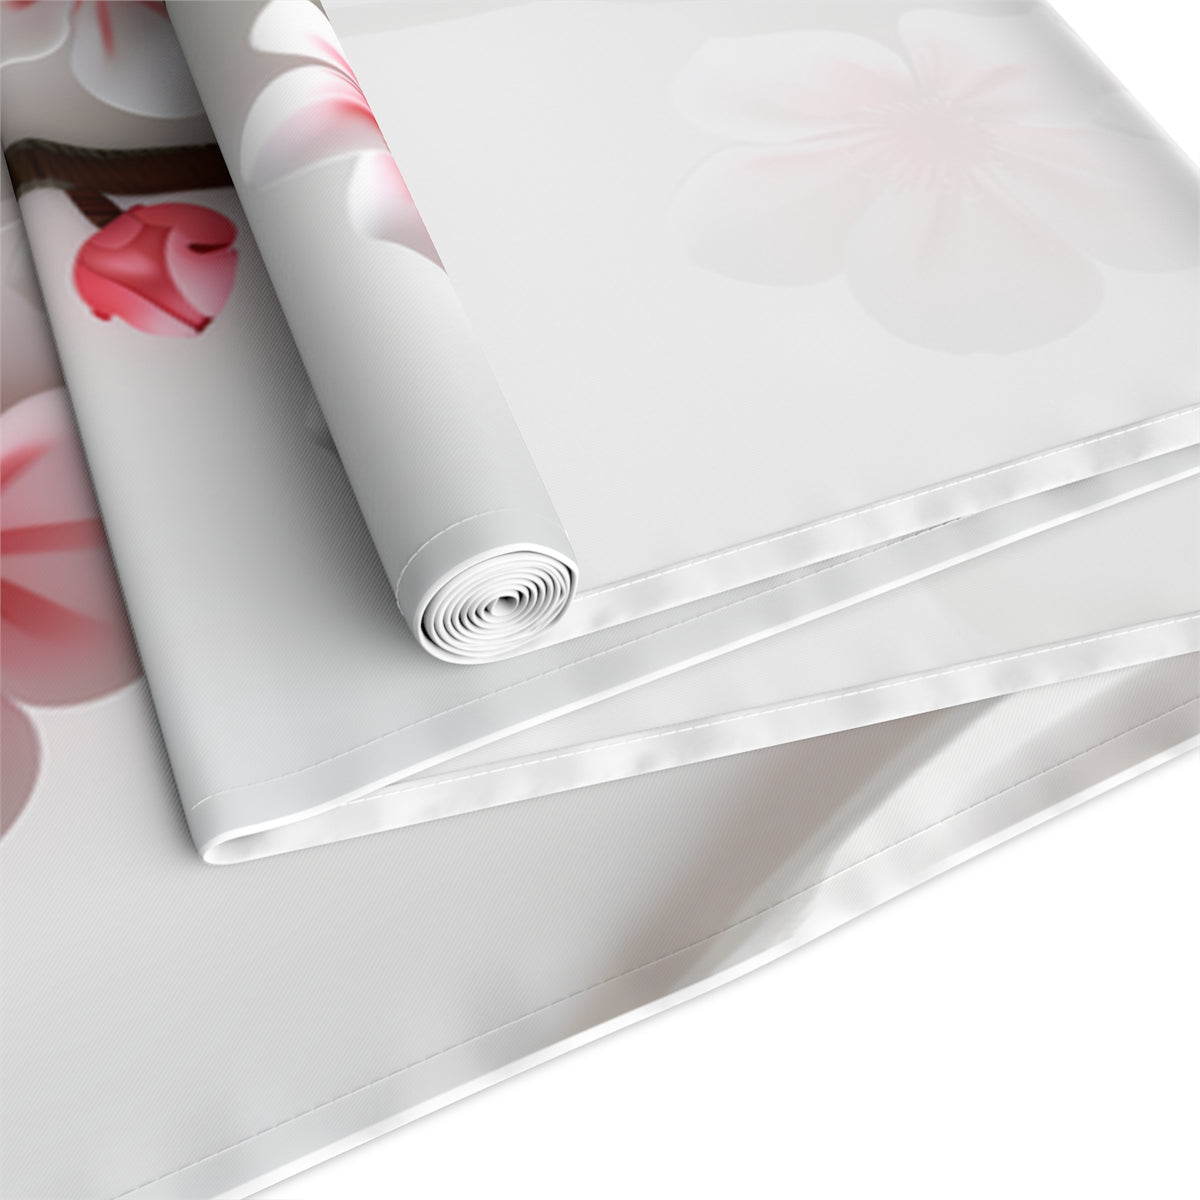 3D Table Runner with Pink Cherry Blossoms Design (16&quot; × 72&quot;)